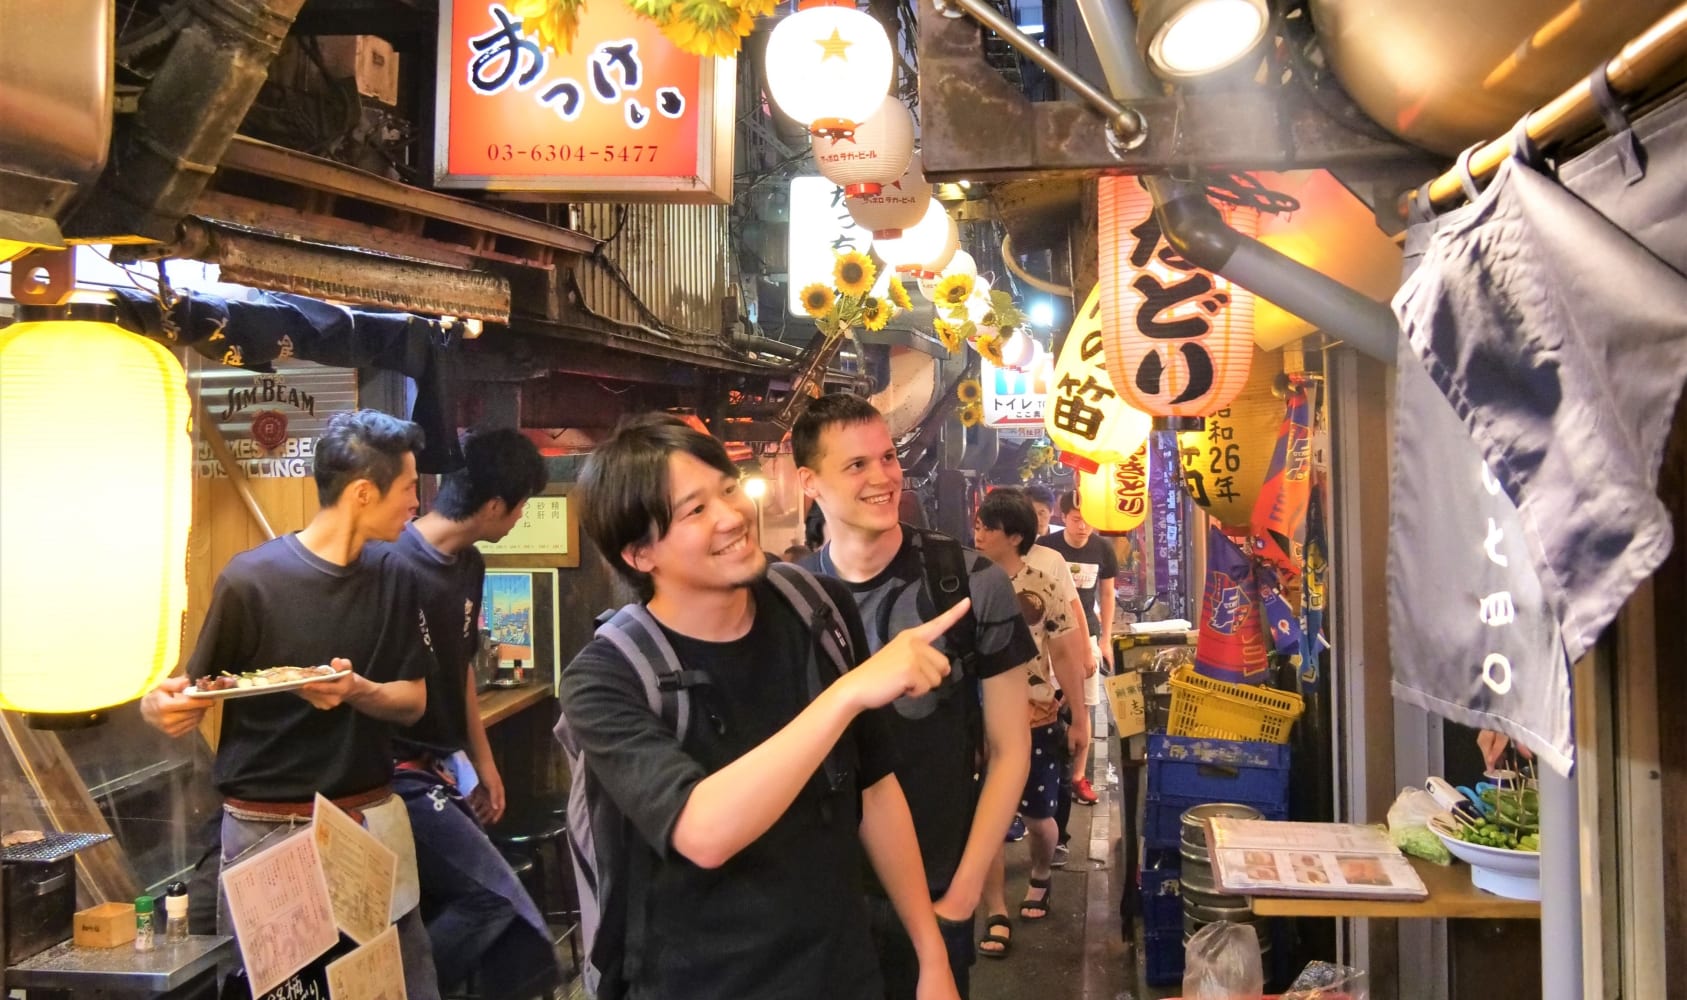 Specialitet mover Trafikprop Top Tokyo Local Guided Tours & Things to do - Small Group Tours |  MagicalTrip